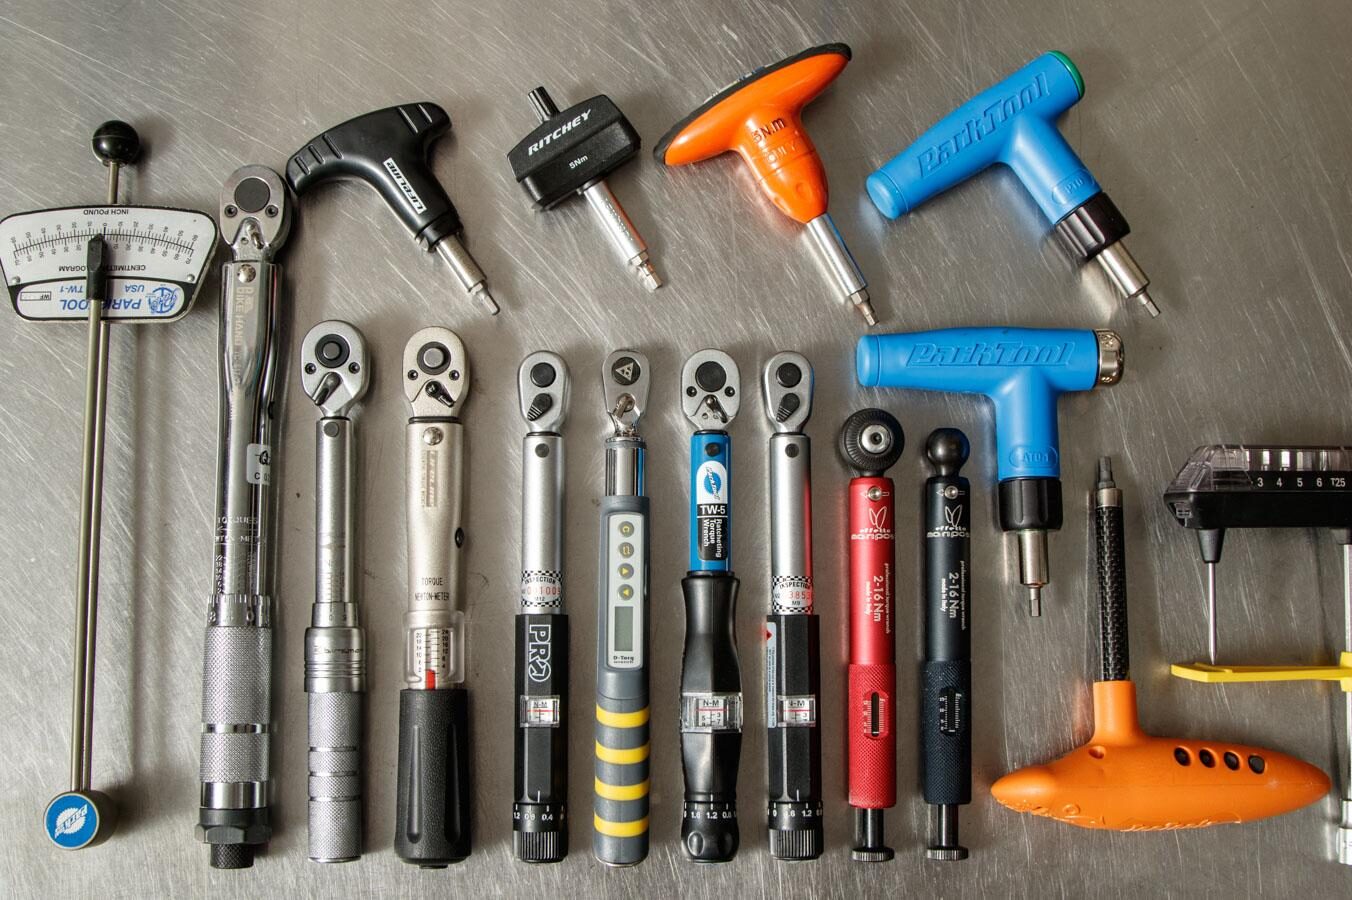 The best bike torque wrenches for cyclists | 15 torque wrenches tested